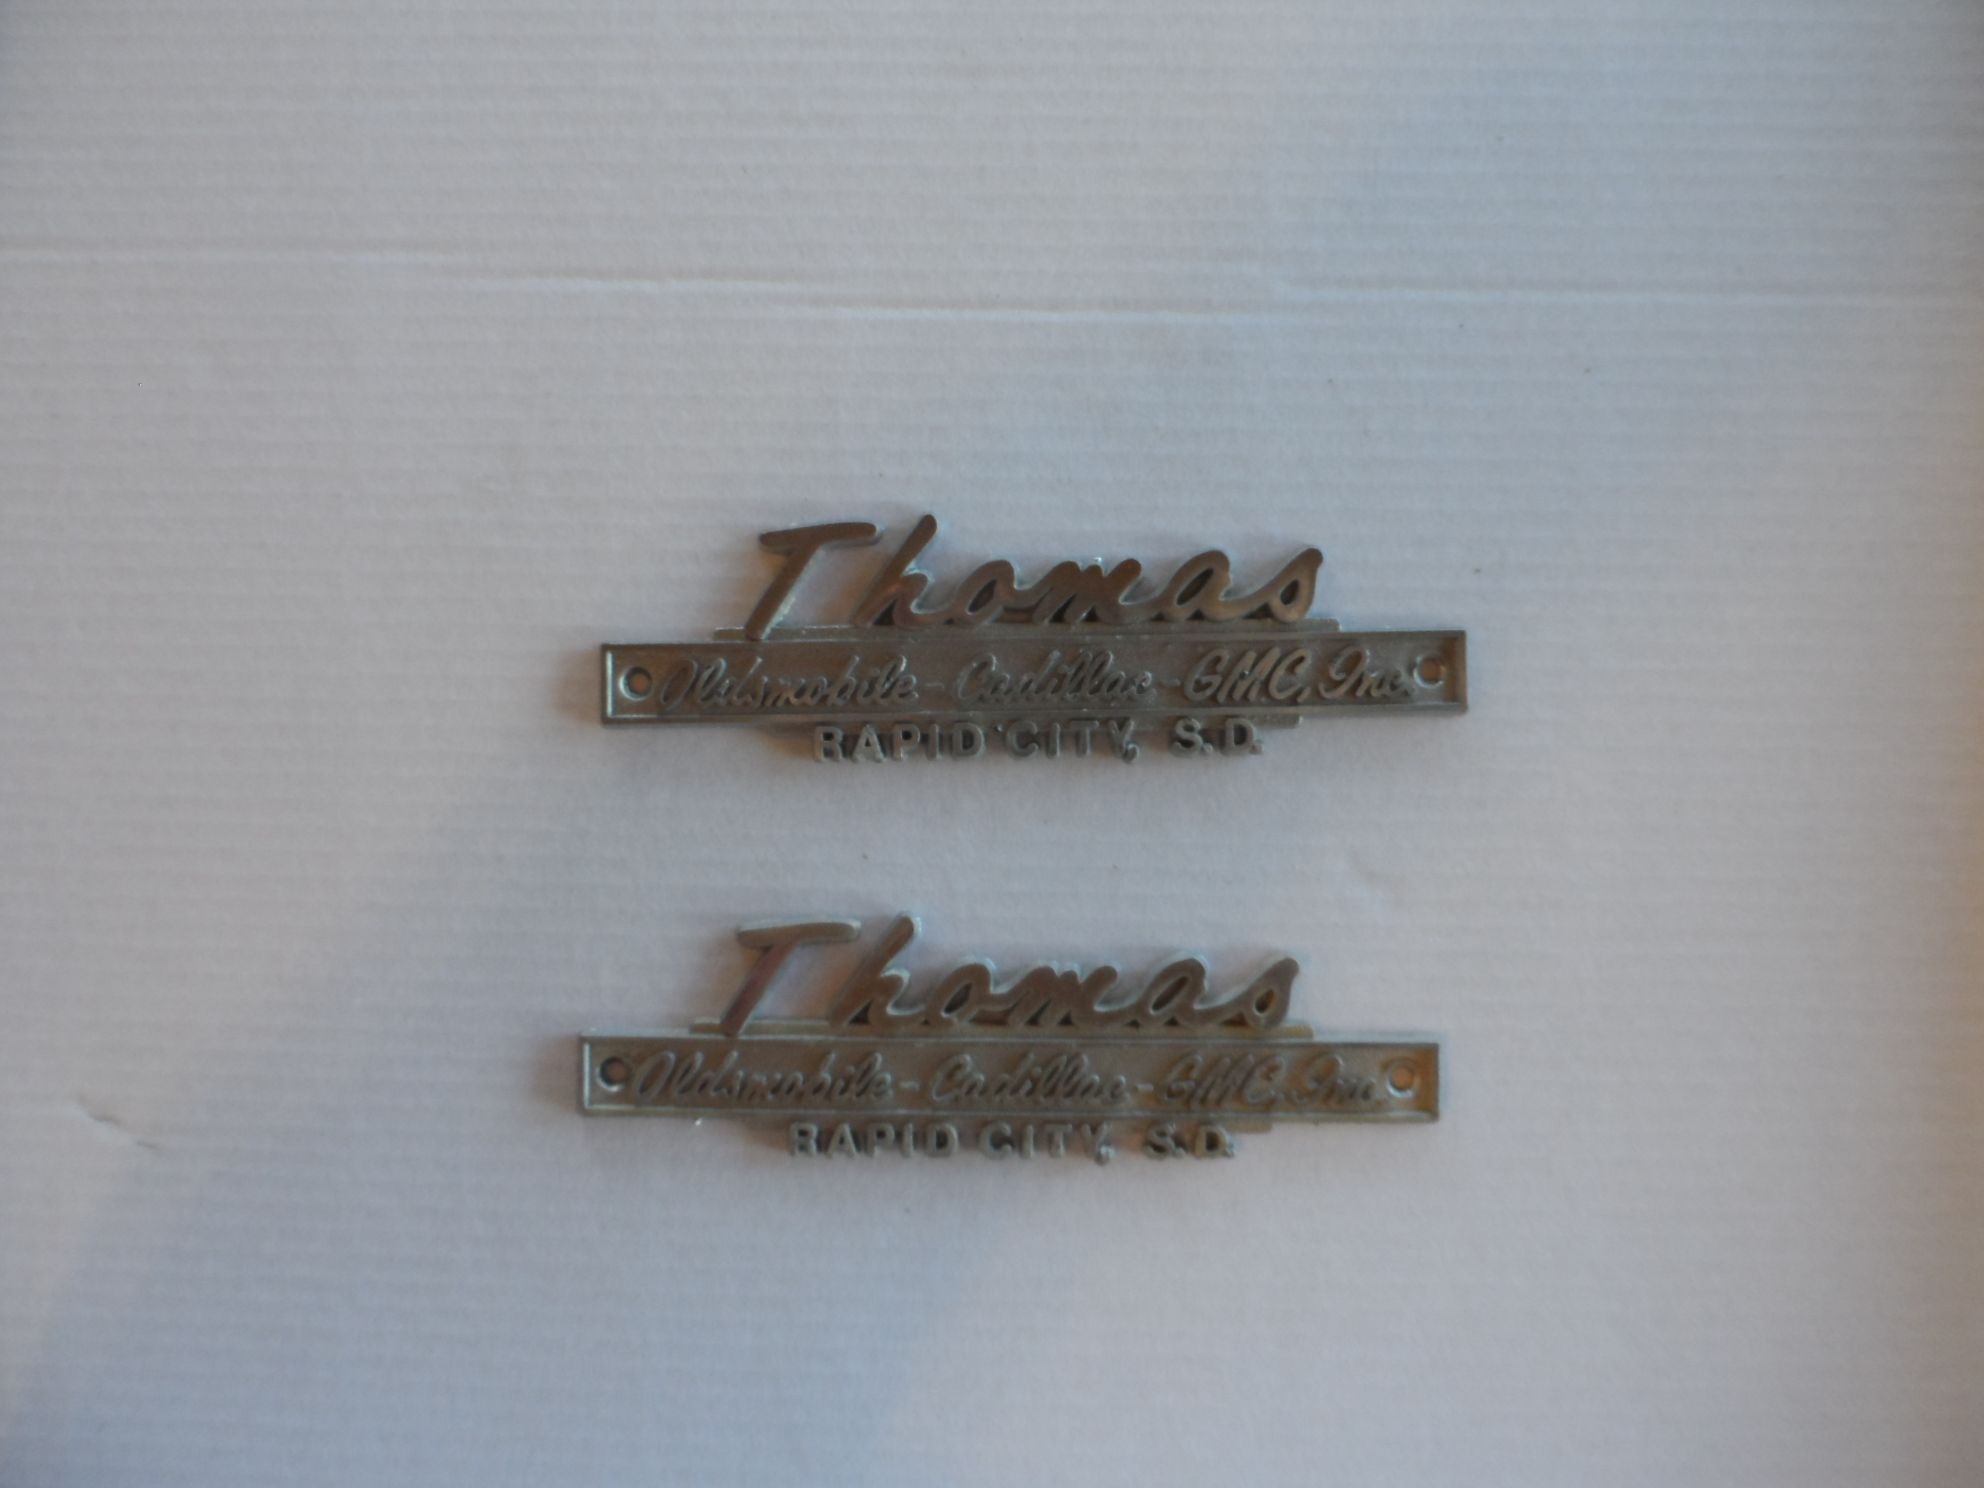  Olds-Cadillac-Gmc Dealer Cast Name Badges SET OF 2 With